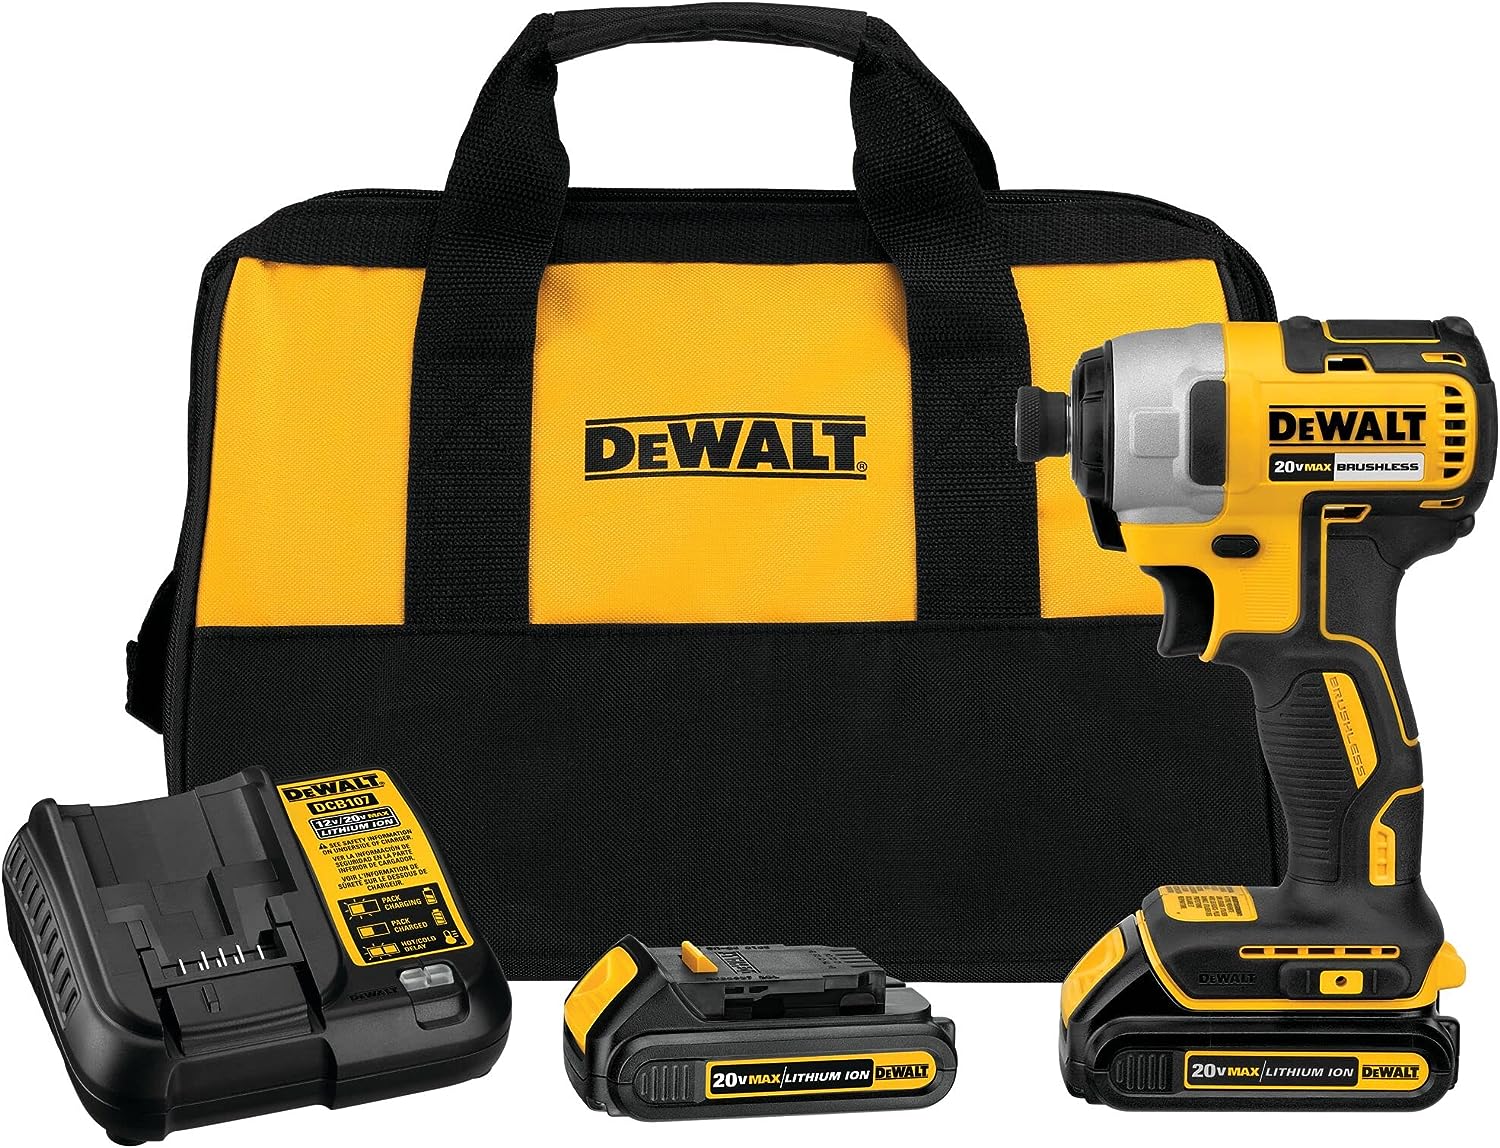 DEWALT 20V MAX Cordless Impact Driver Kit, Brushless, 1/4" Hex Chuck, 2 Batteries and Charger (DCF787C2) $99